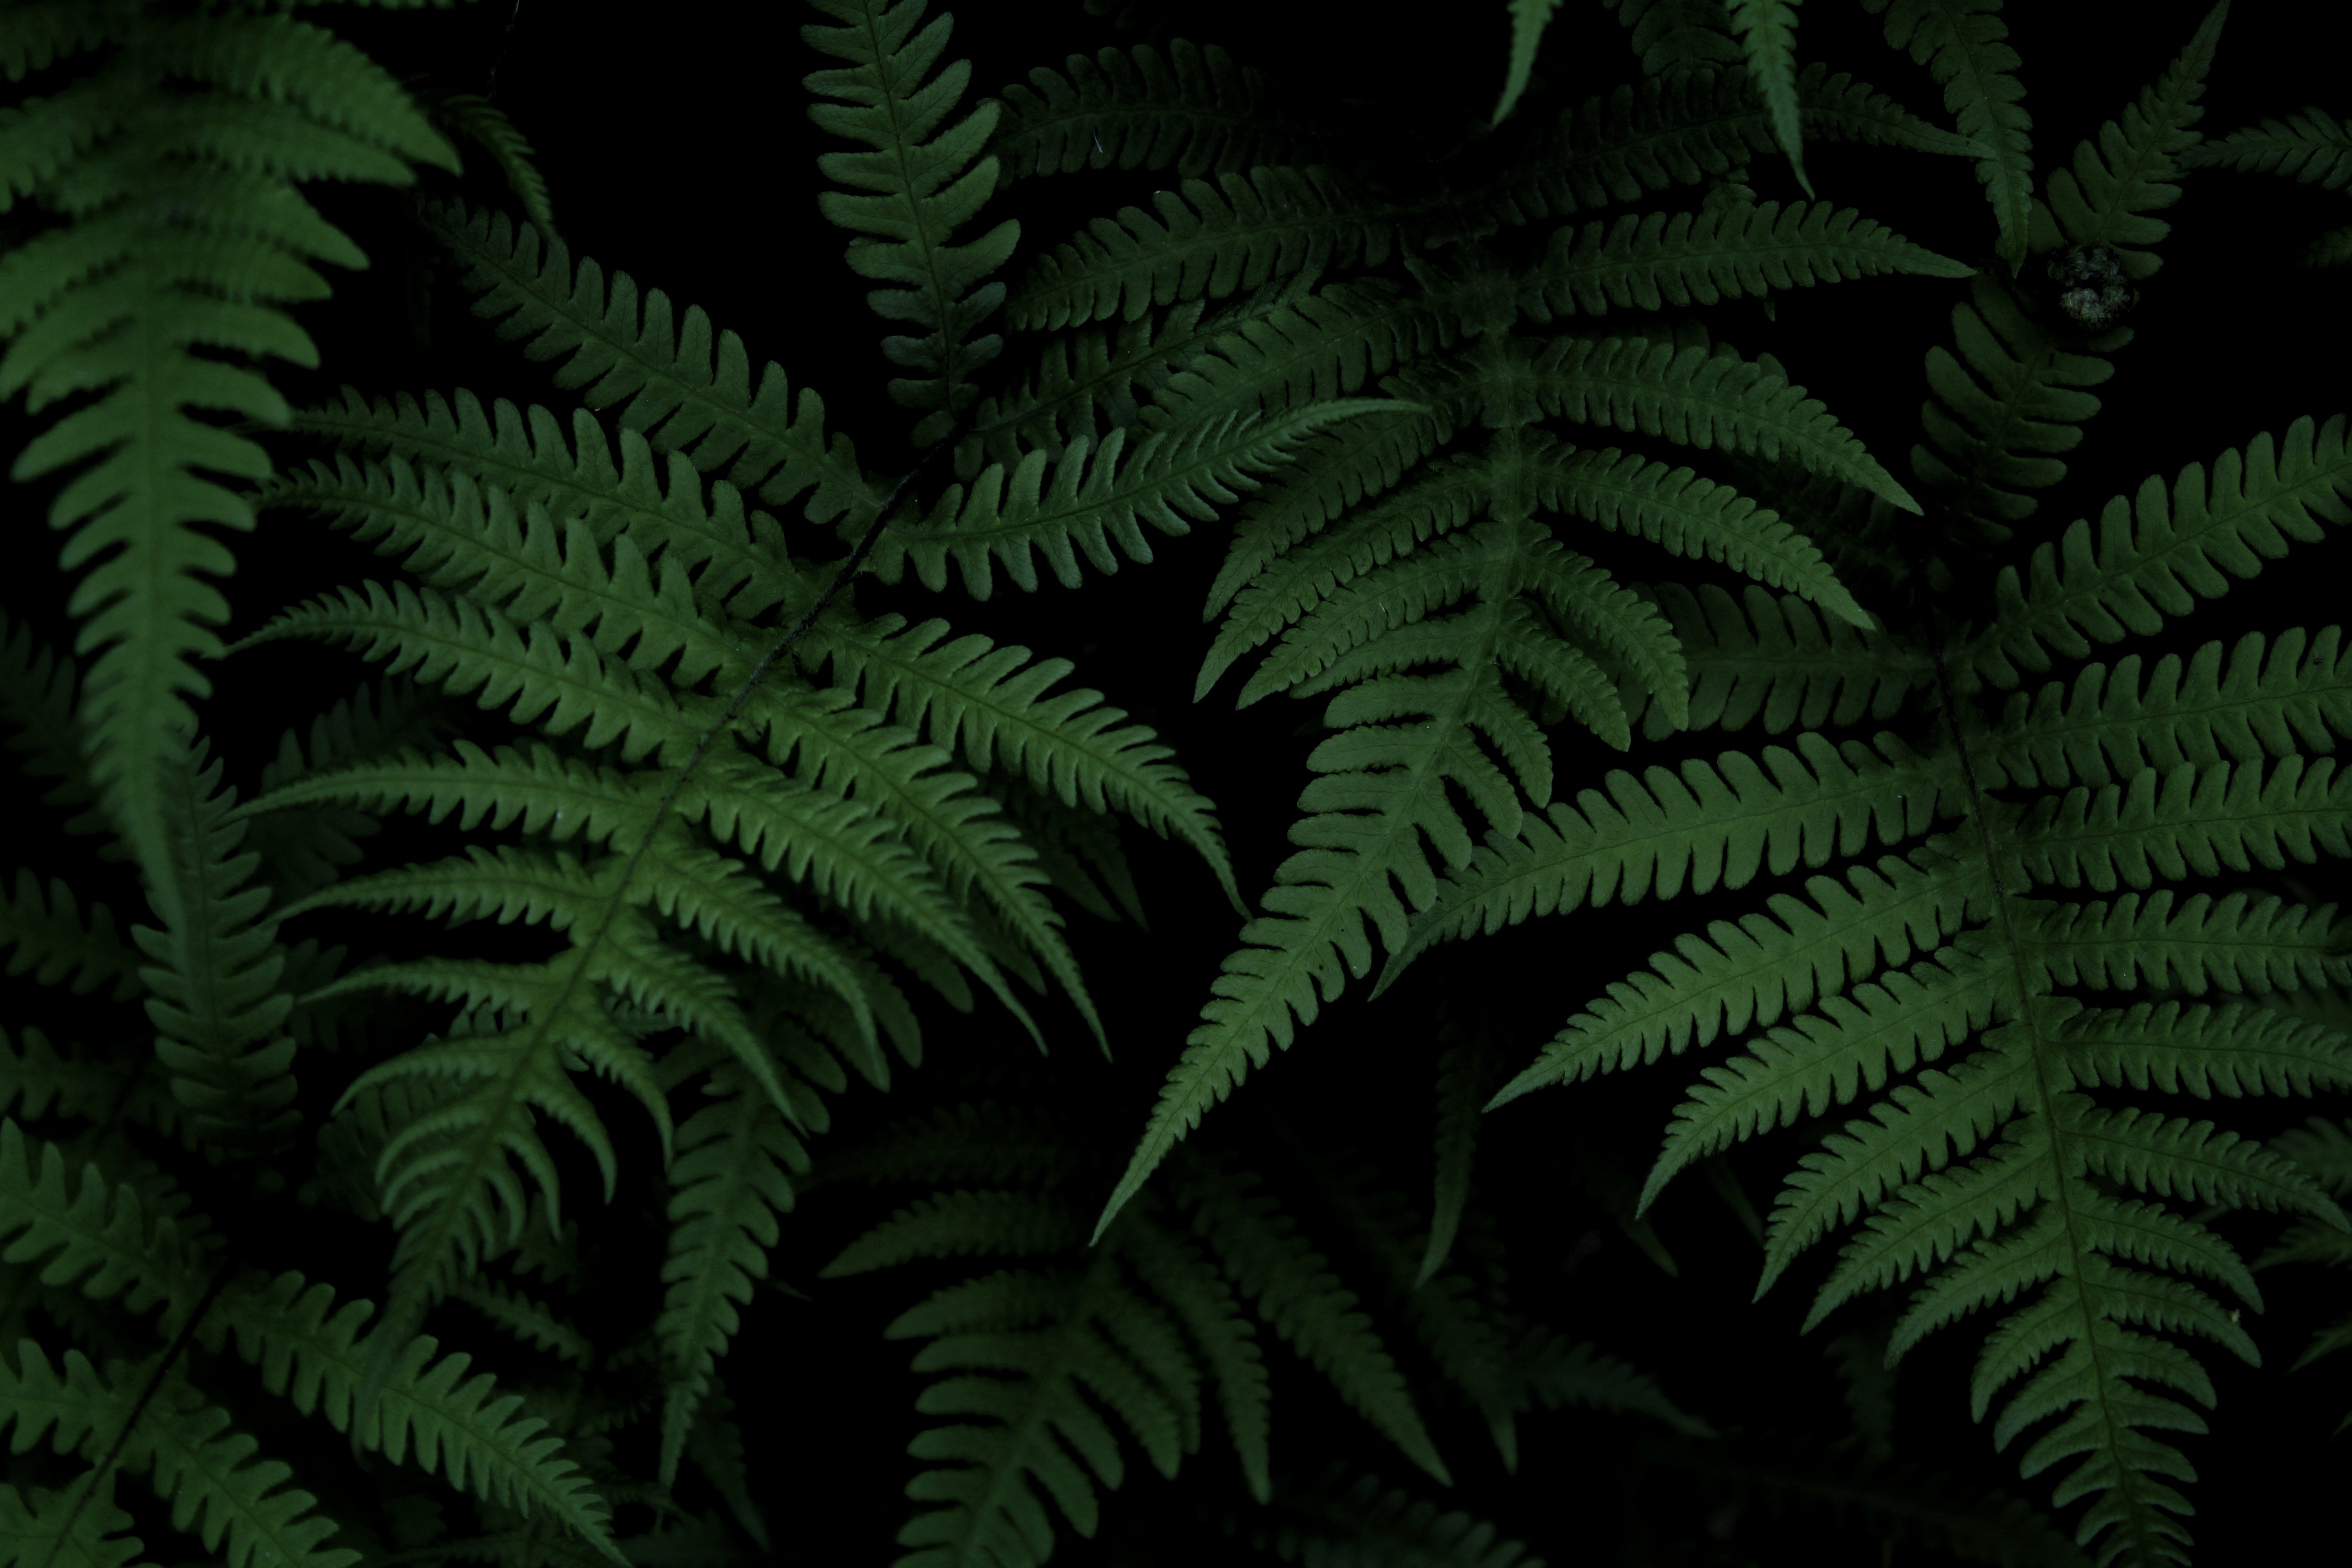 148655 download wallpaper green, nature, bush, fern screensavers and pictures for free